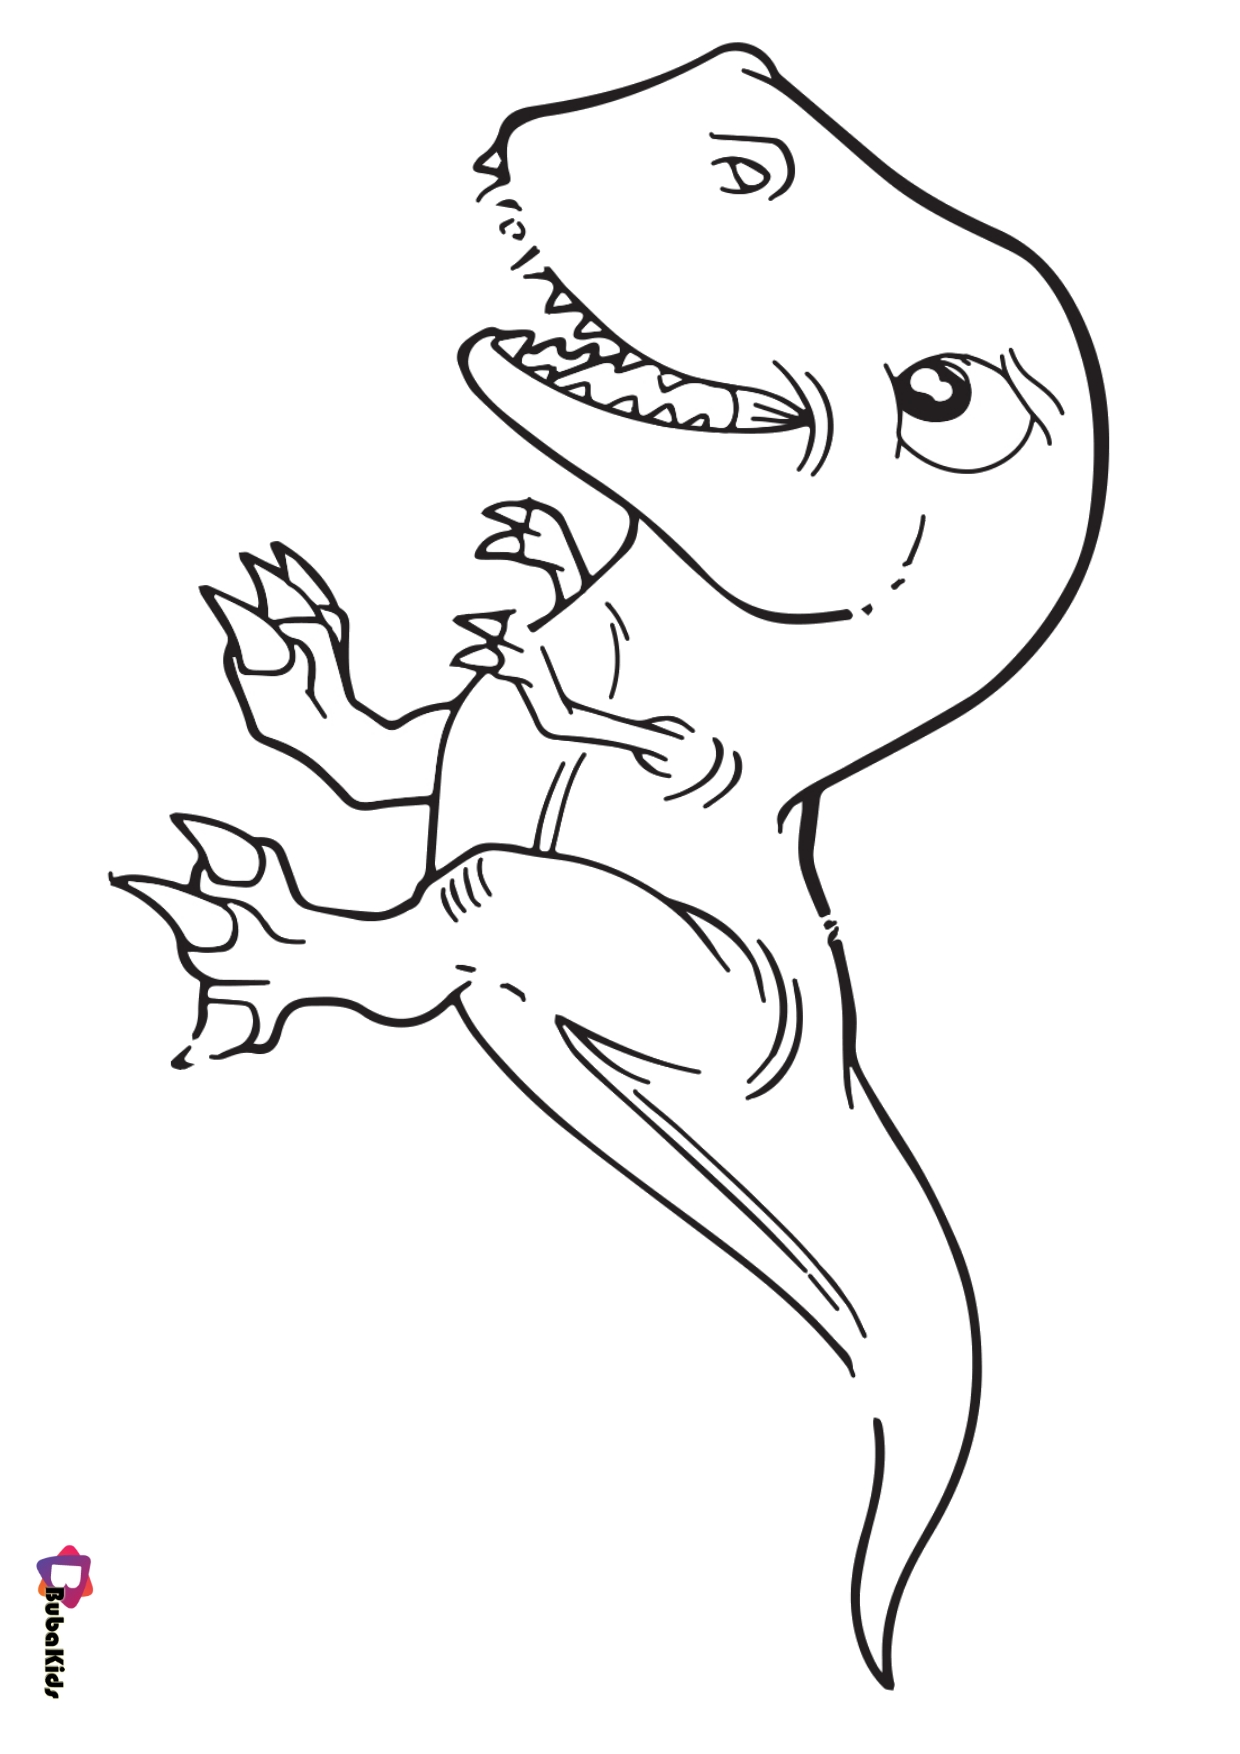 Cute baby dinosaur t-rex colouring page Wallpaper